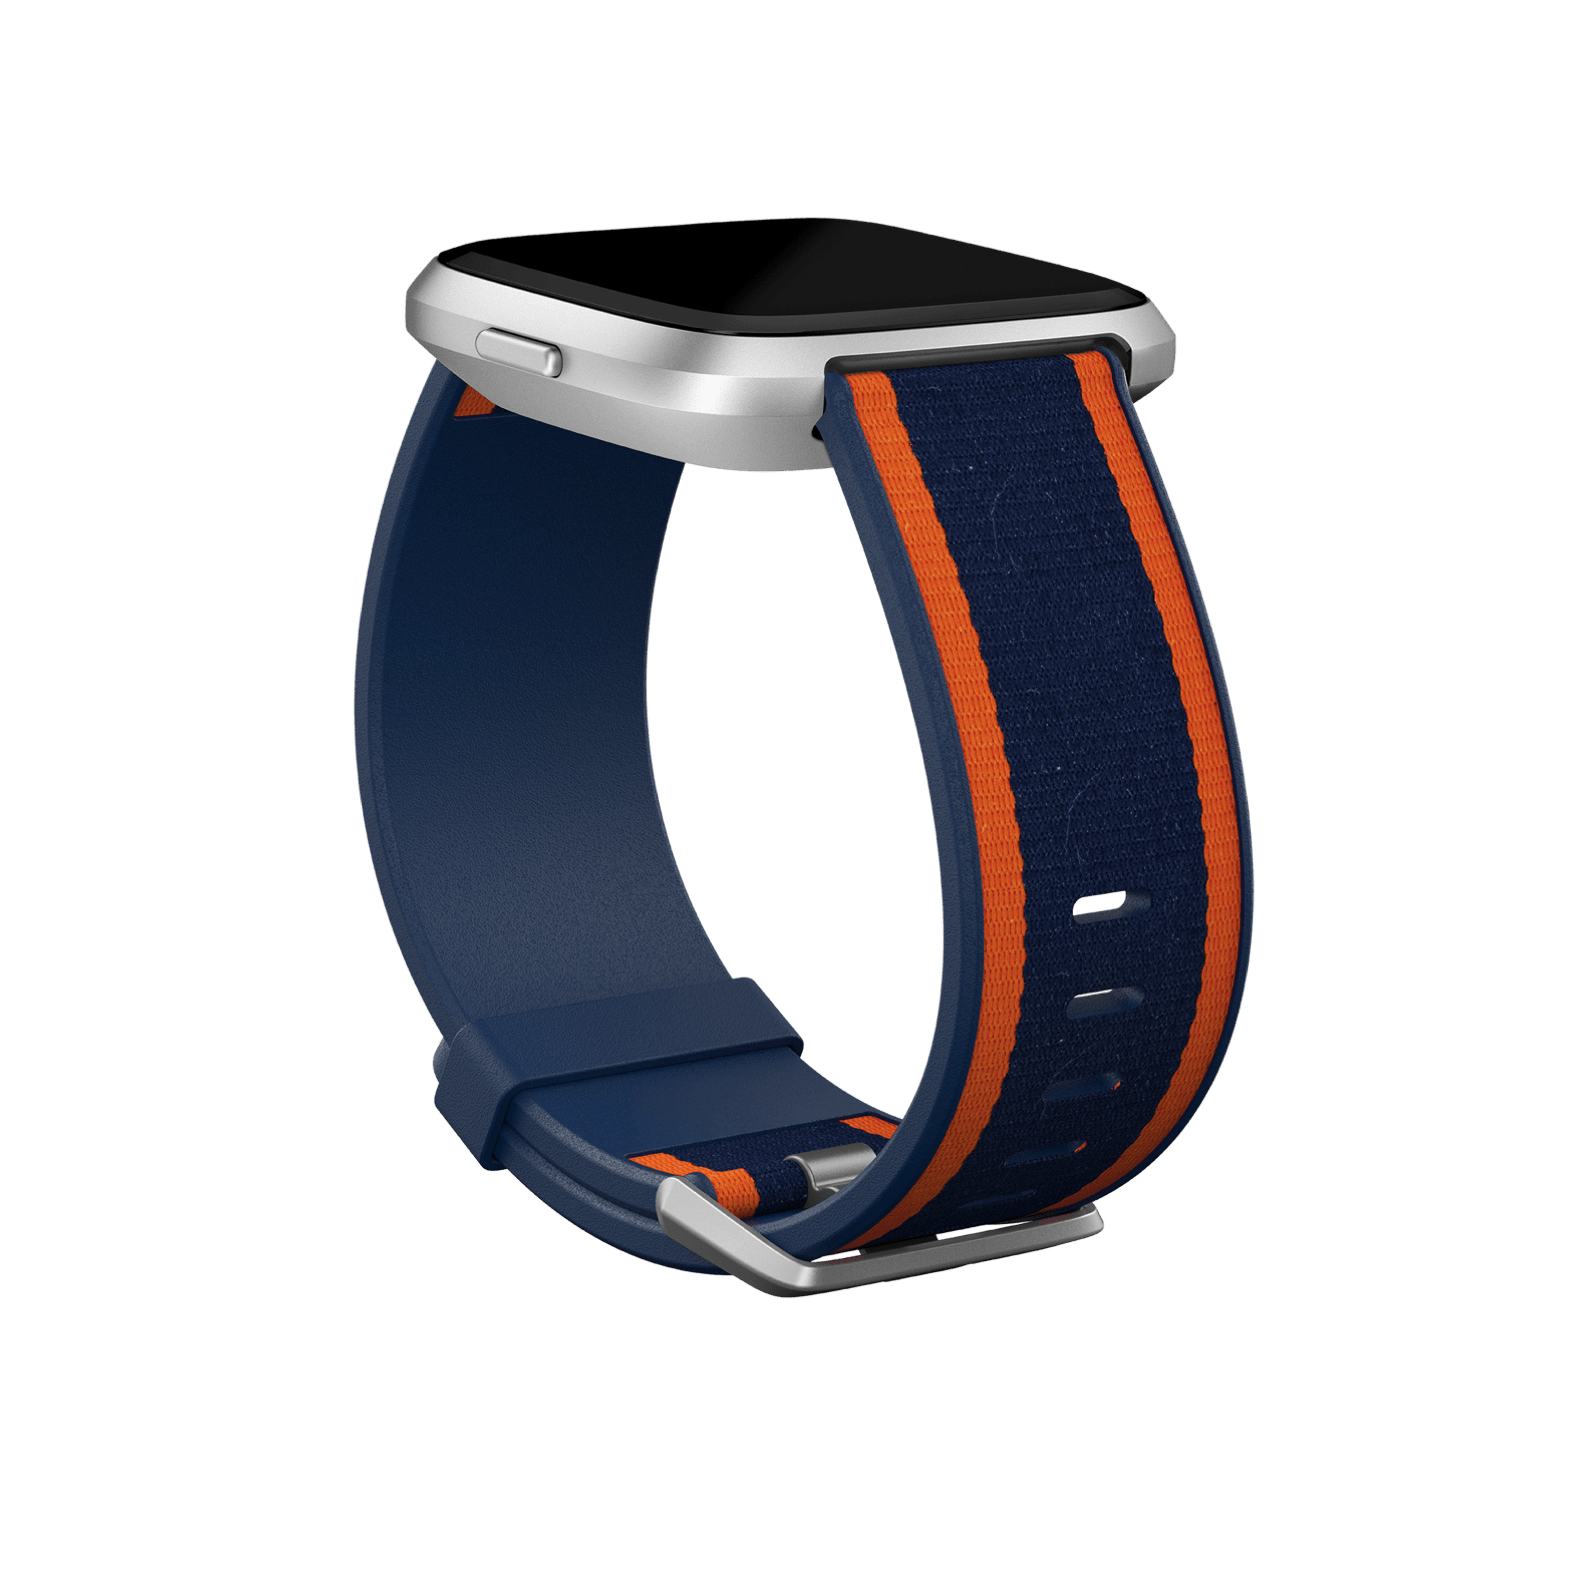 fitbit watch band